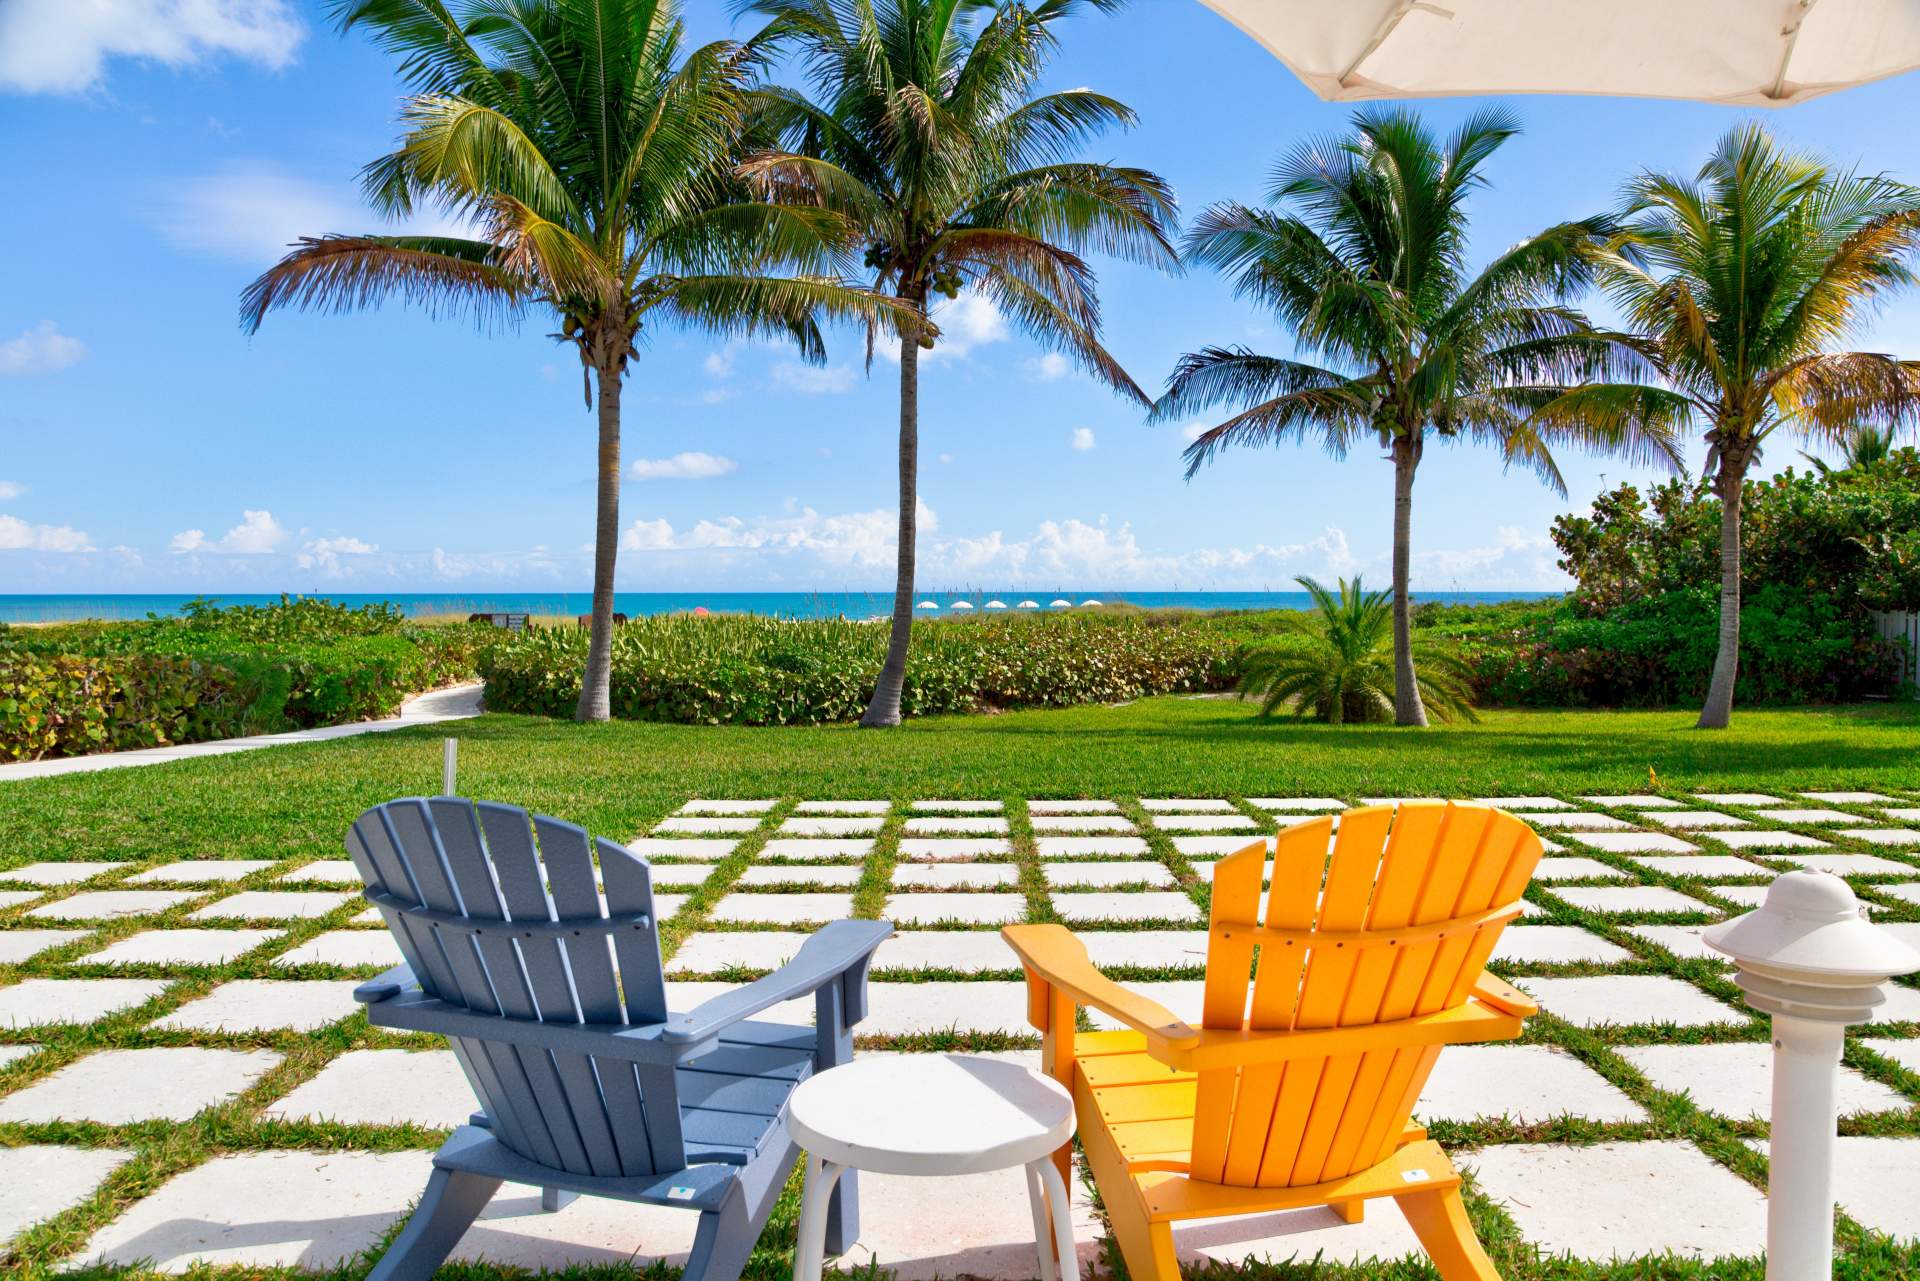 Blue and orange lawn chairs with beach in the background